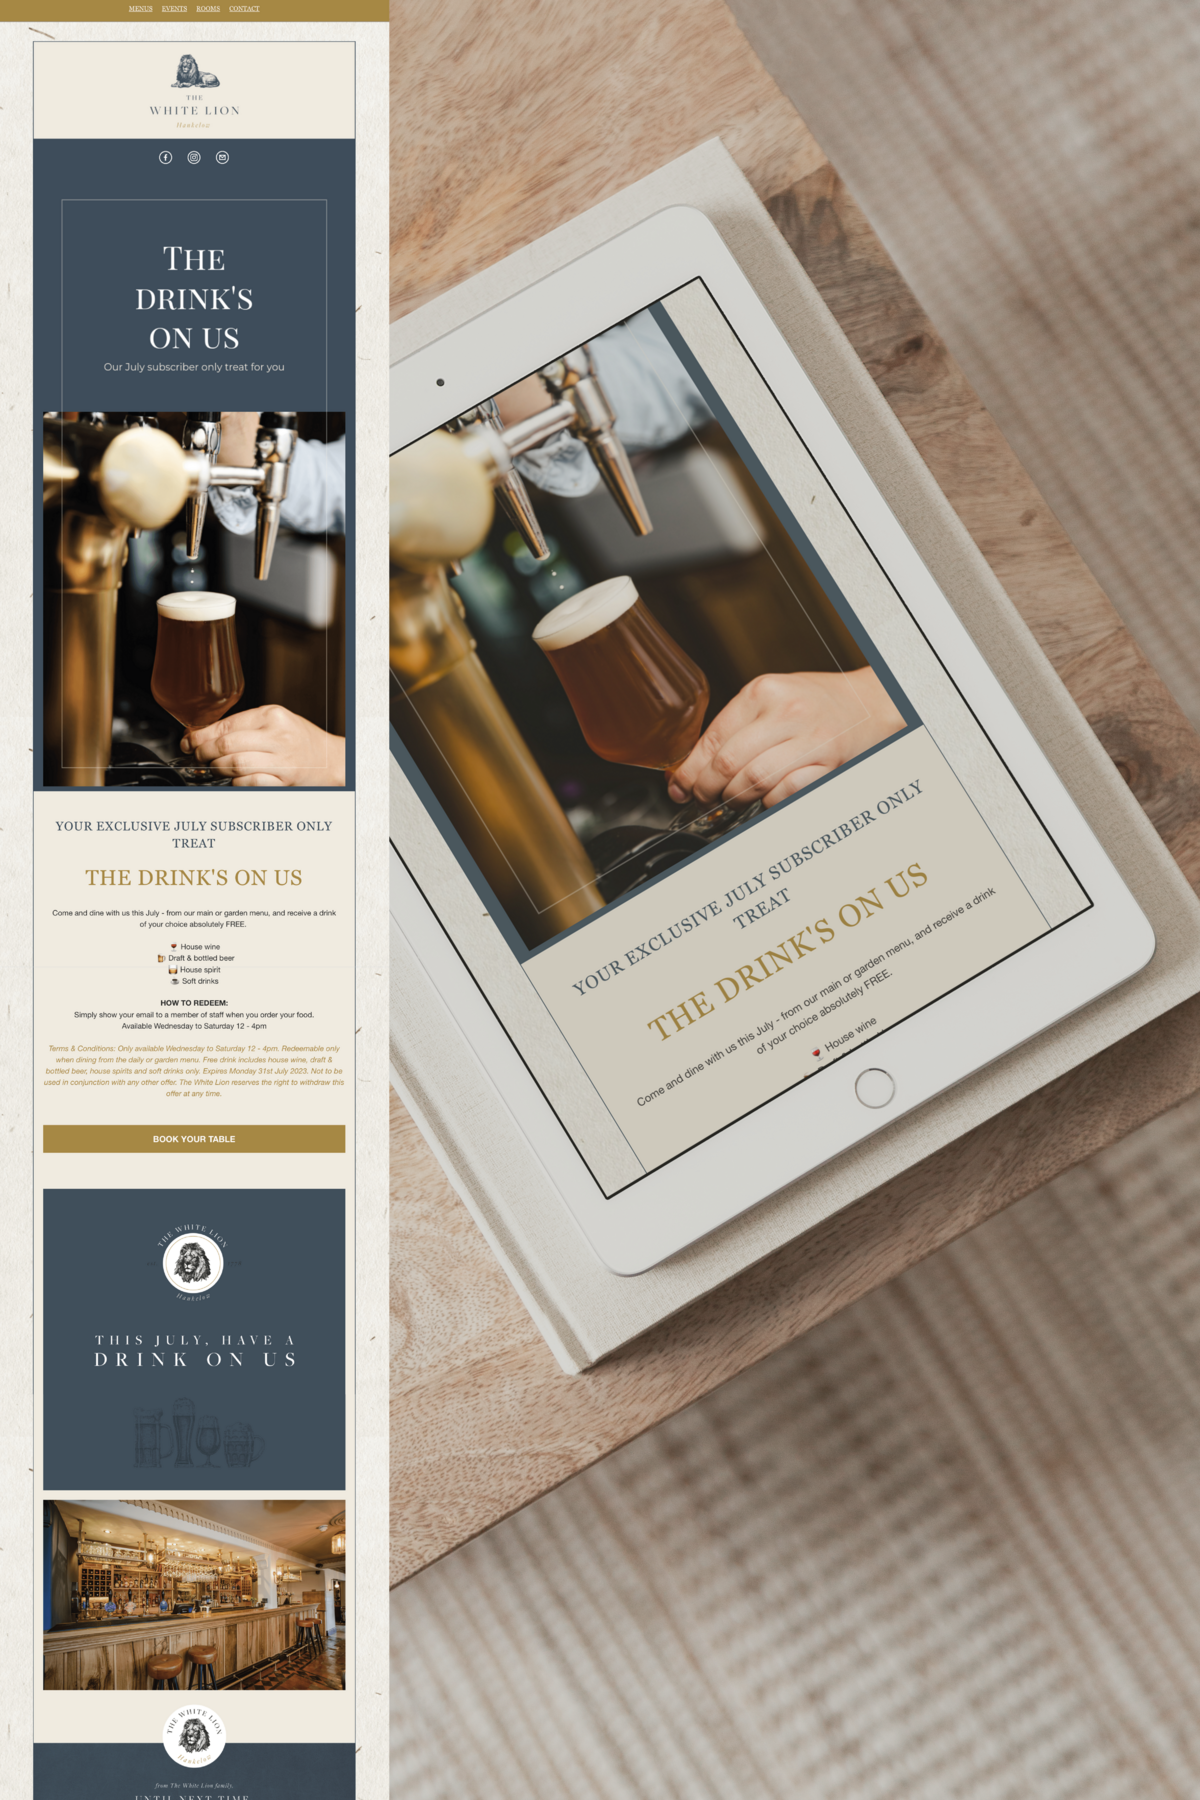 The White Lion E-marketing newsletter design by The Little Paper Shop